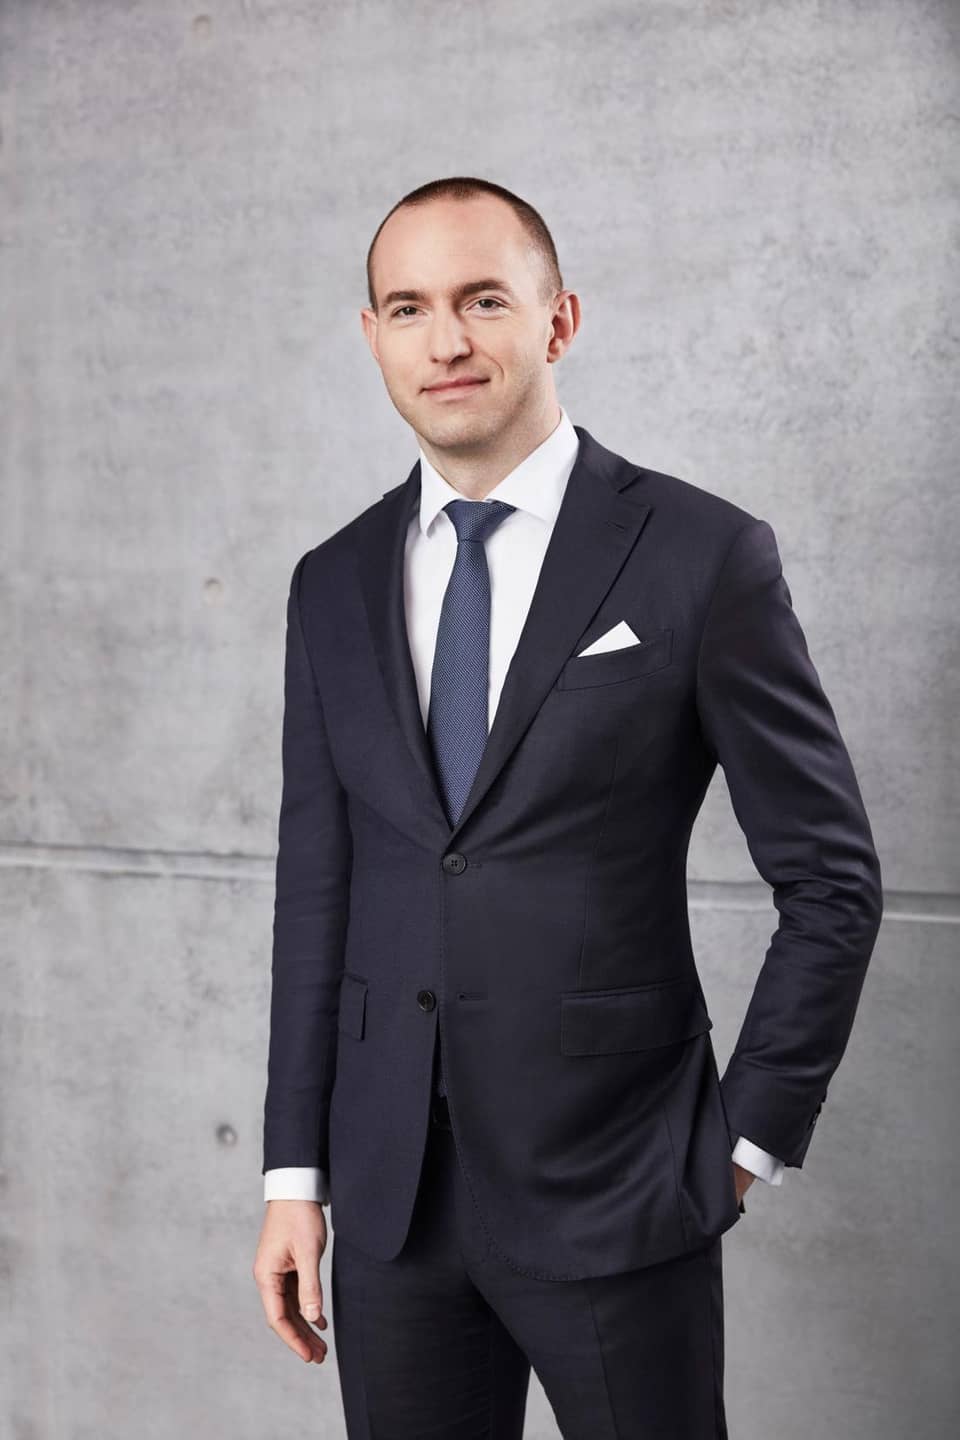 Jan Marsalek, an Austrian national born in 1980, has worked for Wirecard since 2000. In addition to being a member of the company's board, he is also responsible for Wirecard's Asian operations.